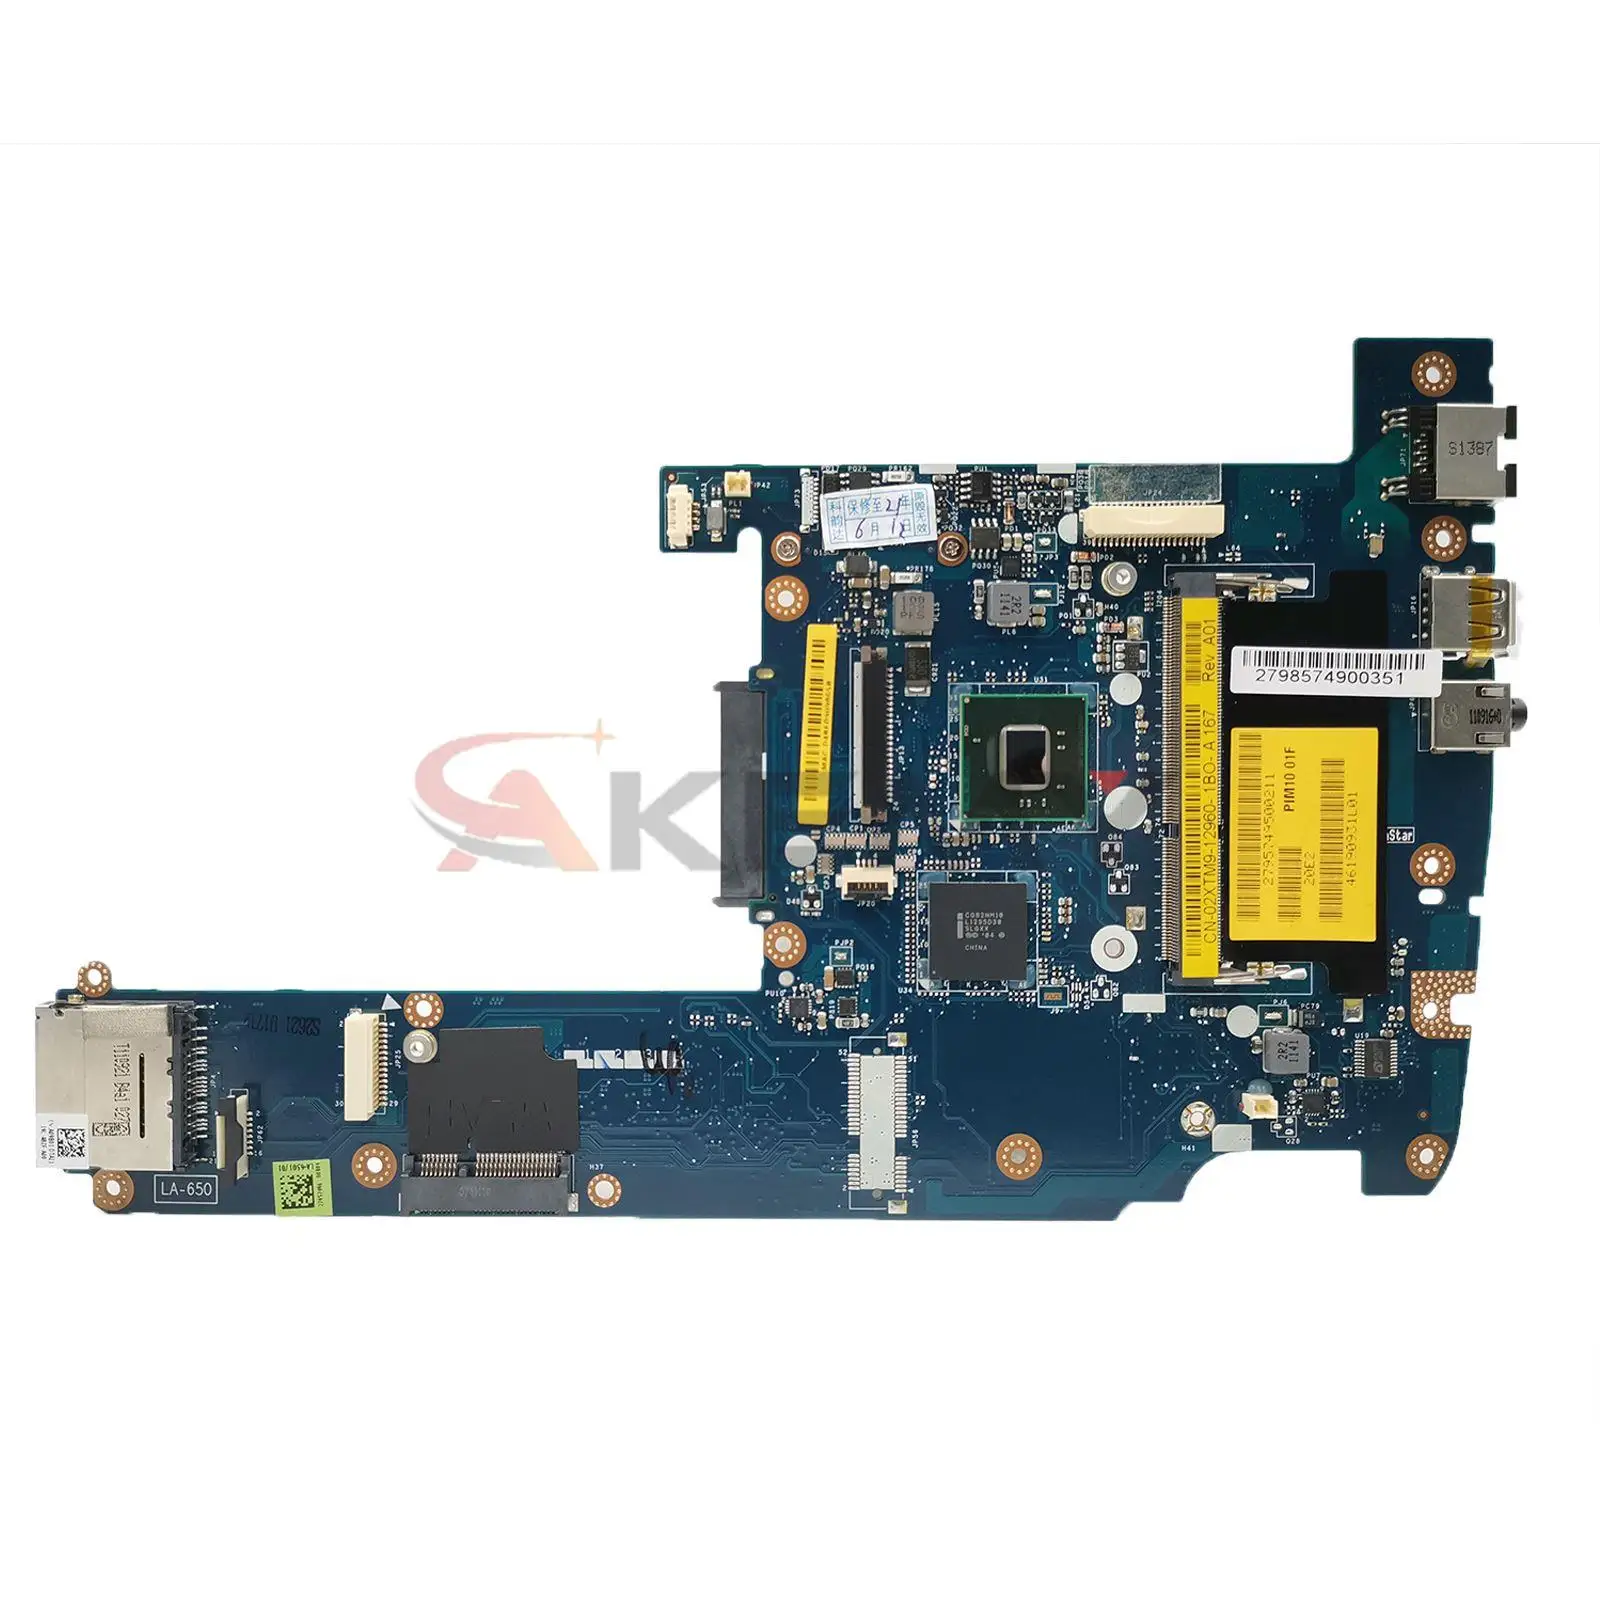 

CN-02XTM9 02XTM9 2XTM9 For Dell Inspiron MINI 1018 With SLBX9 N455 CPU Mainboard LA-6501P Laptop Motherboard 100%Fully Tested OK